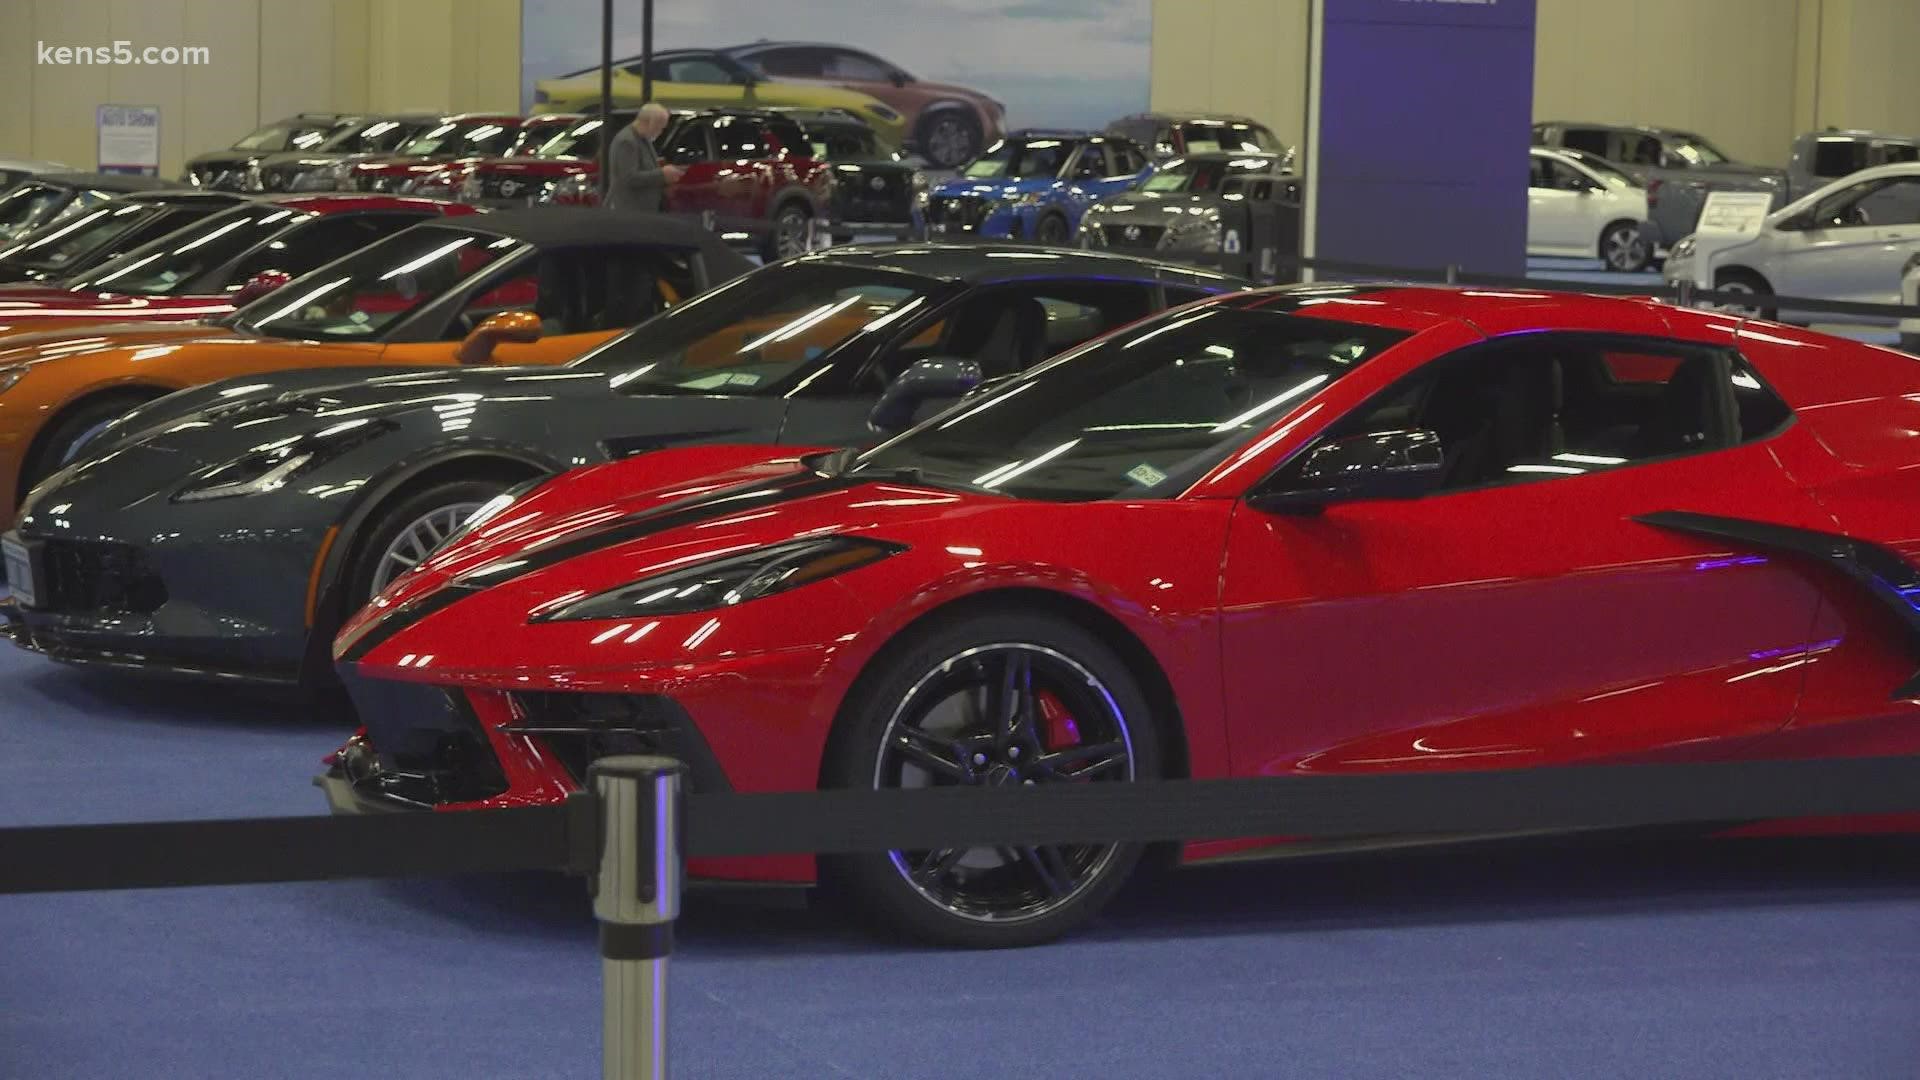 San Antonio Auto and Truck Show returns for its 52nd year